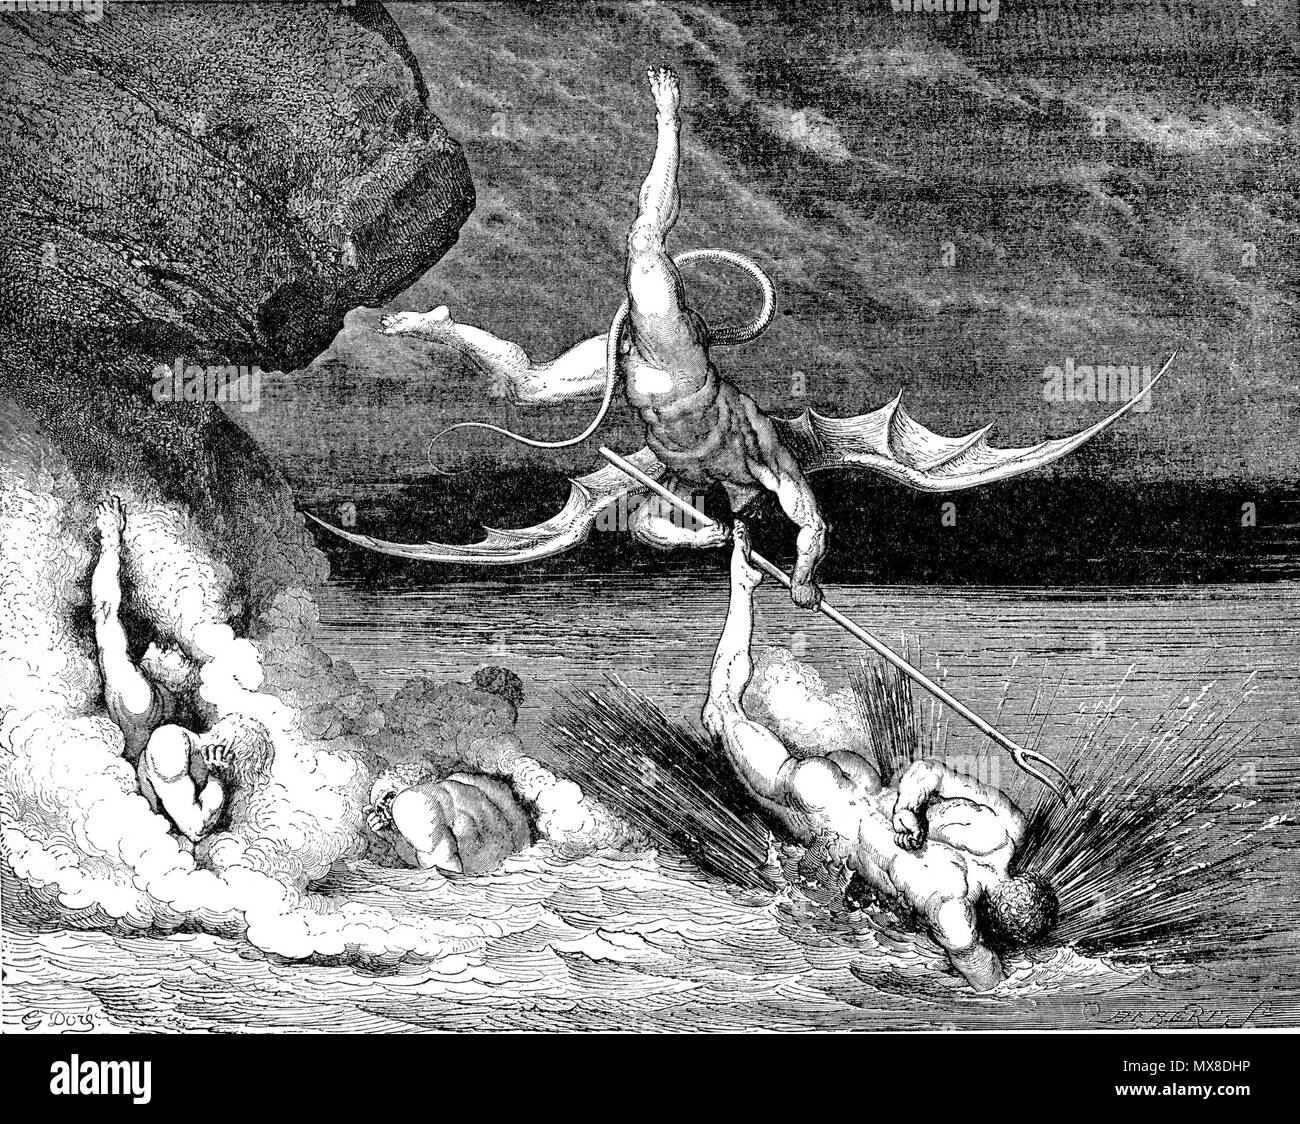 . High resolution scan of engraving by Gustave Doré illustrating Canto XXII of Divine Comedy, Inferno, by Dante Alighieri. Caption: Ciampolo escaping from the Demon Alichino . 31 January 2008. scanned, post-processed, and uploaded by Karl Hahn 174 DVinfernoCiampoloDemonAlichino m Stock Photo